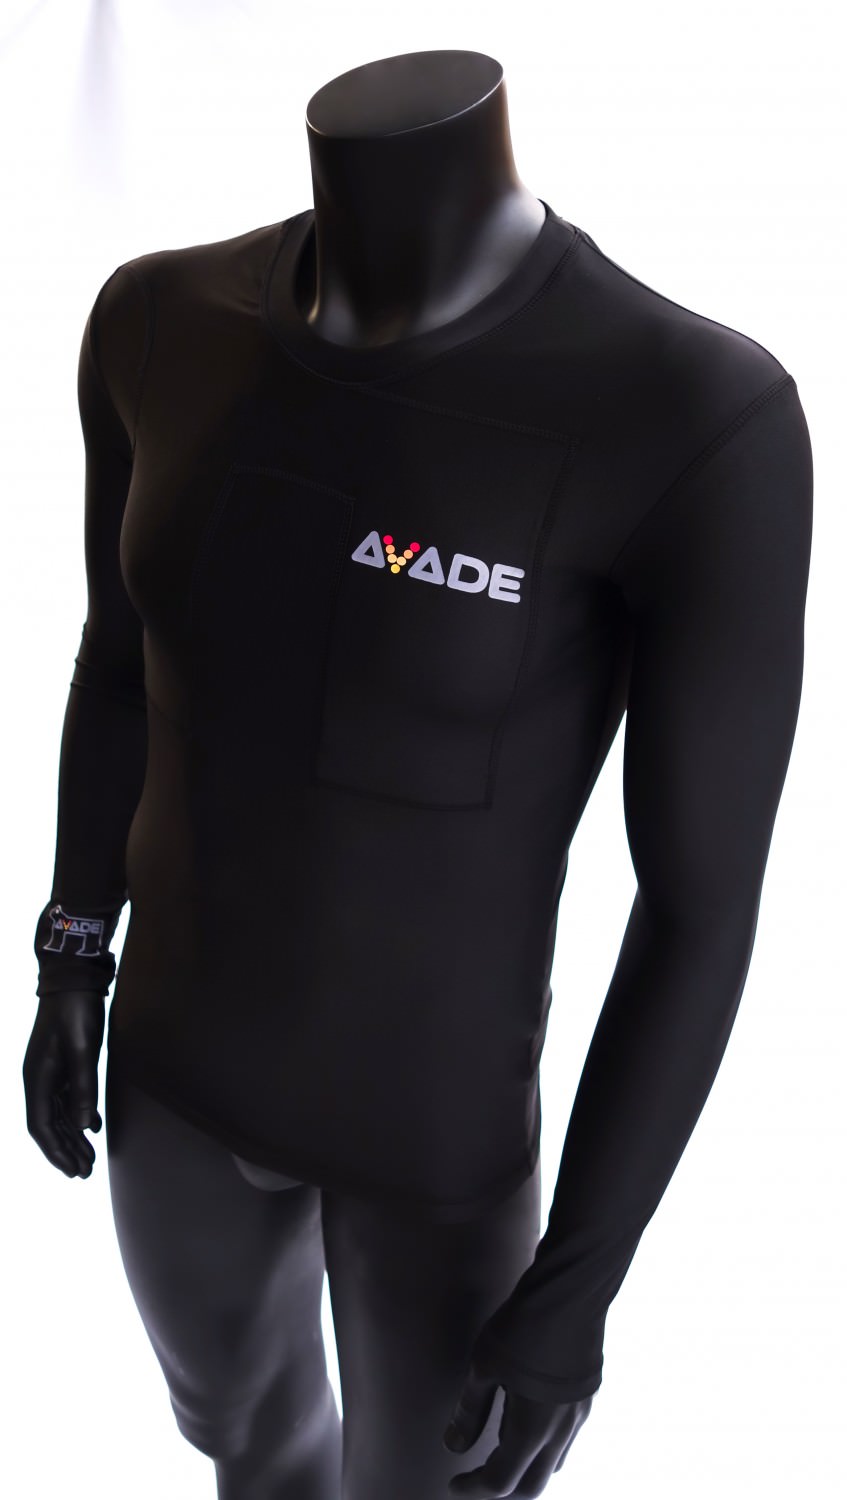 Avade-Black-product-special-cb